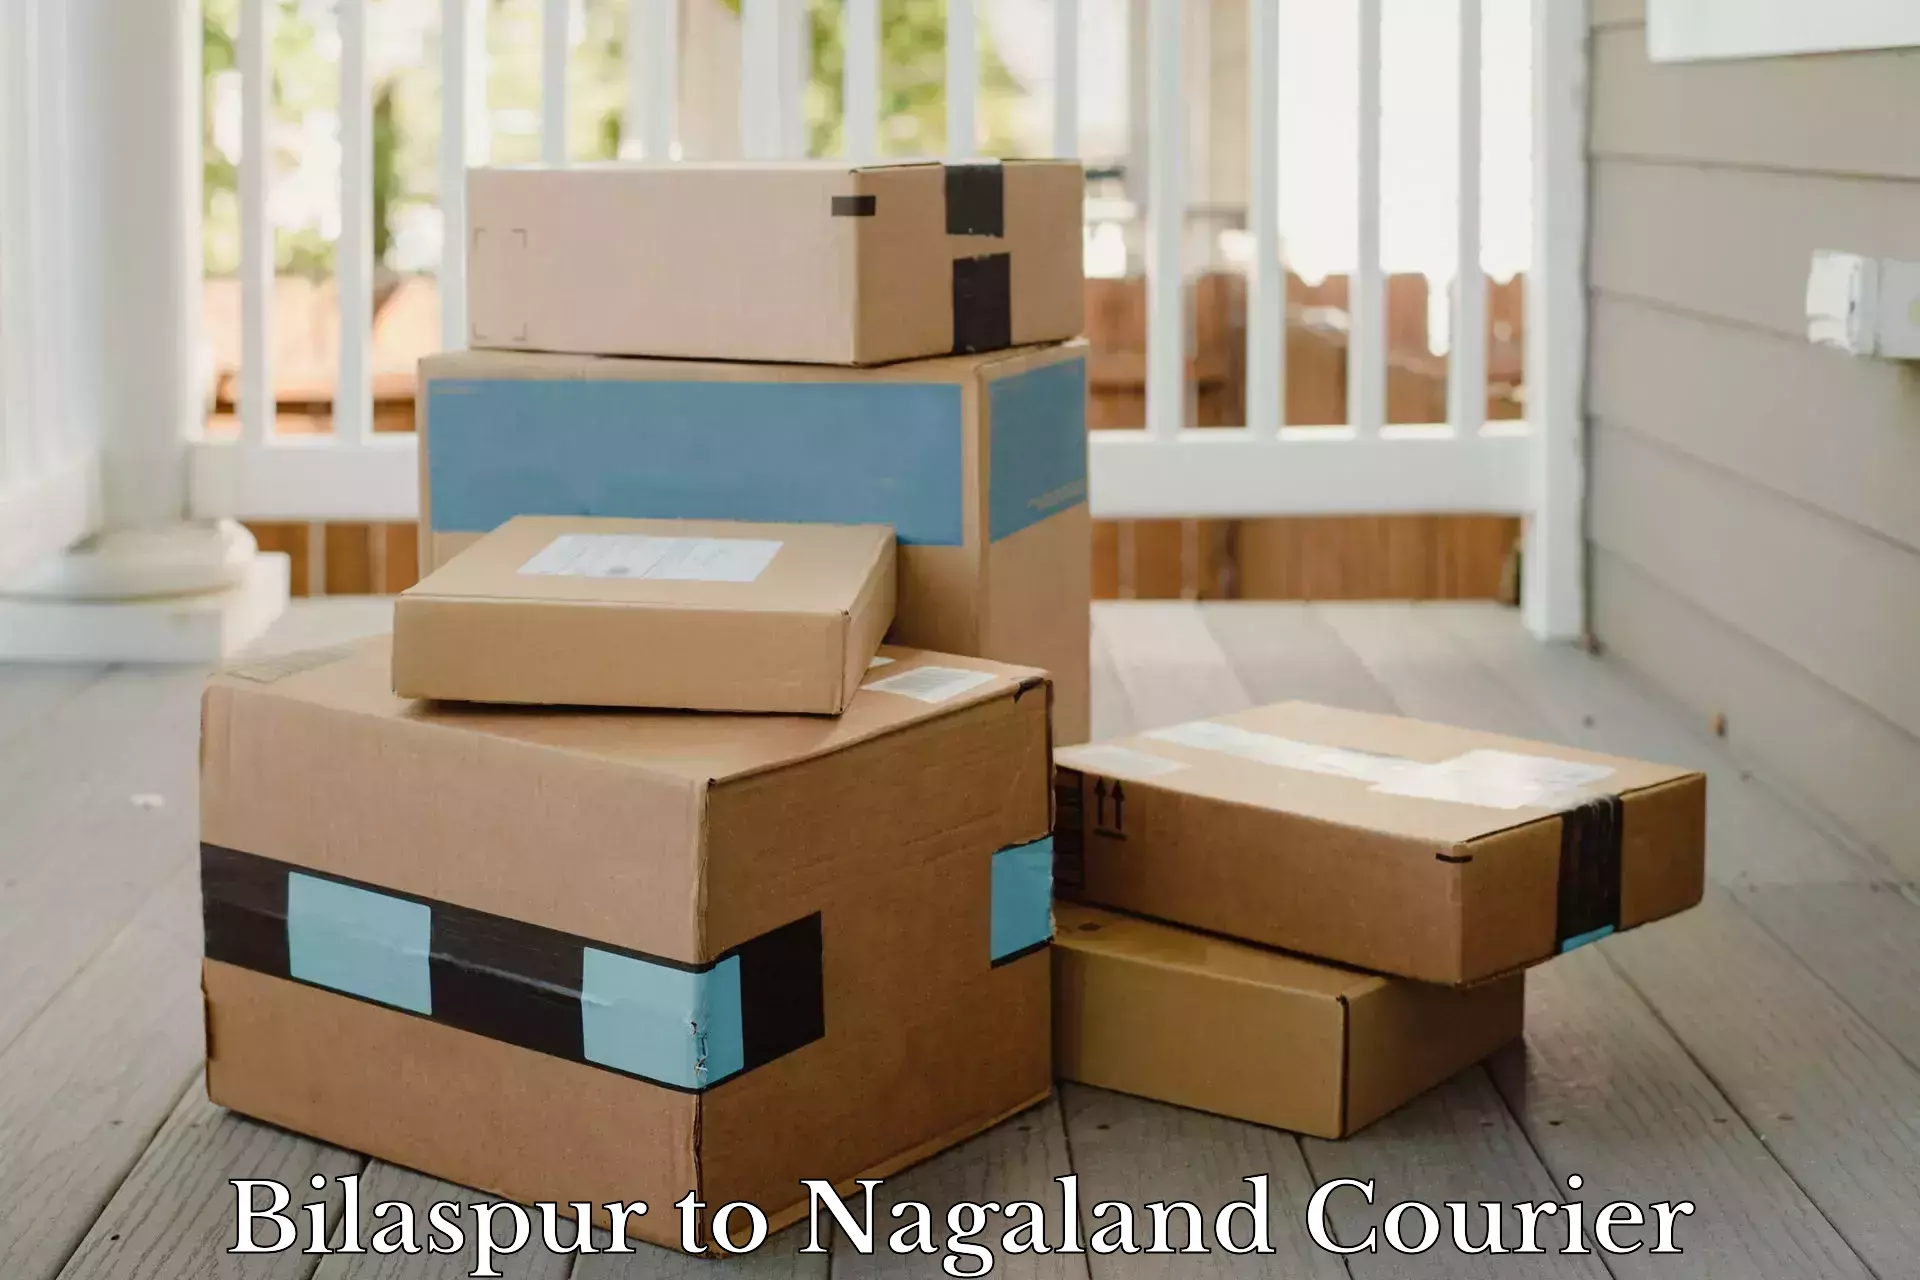 Sustainable shipping practices Bilaspur to Nagaland